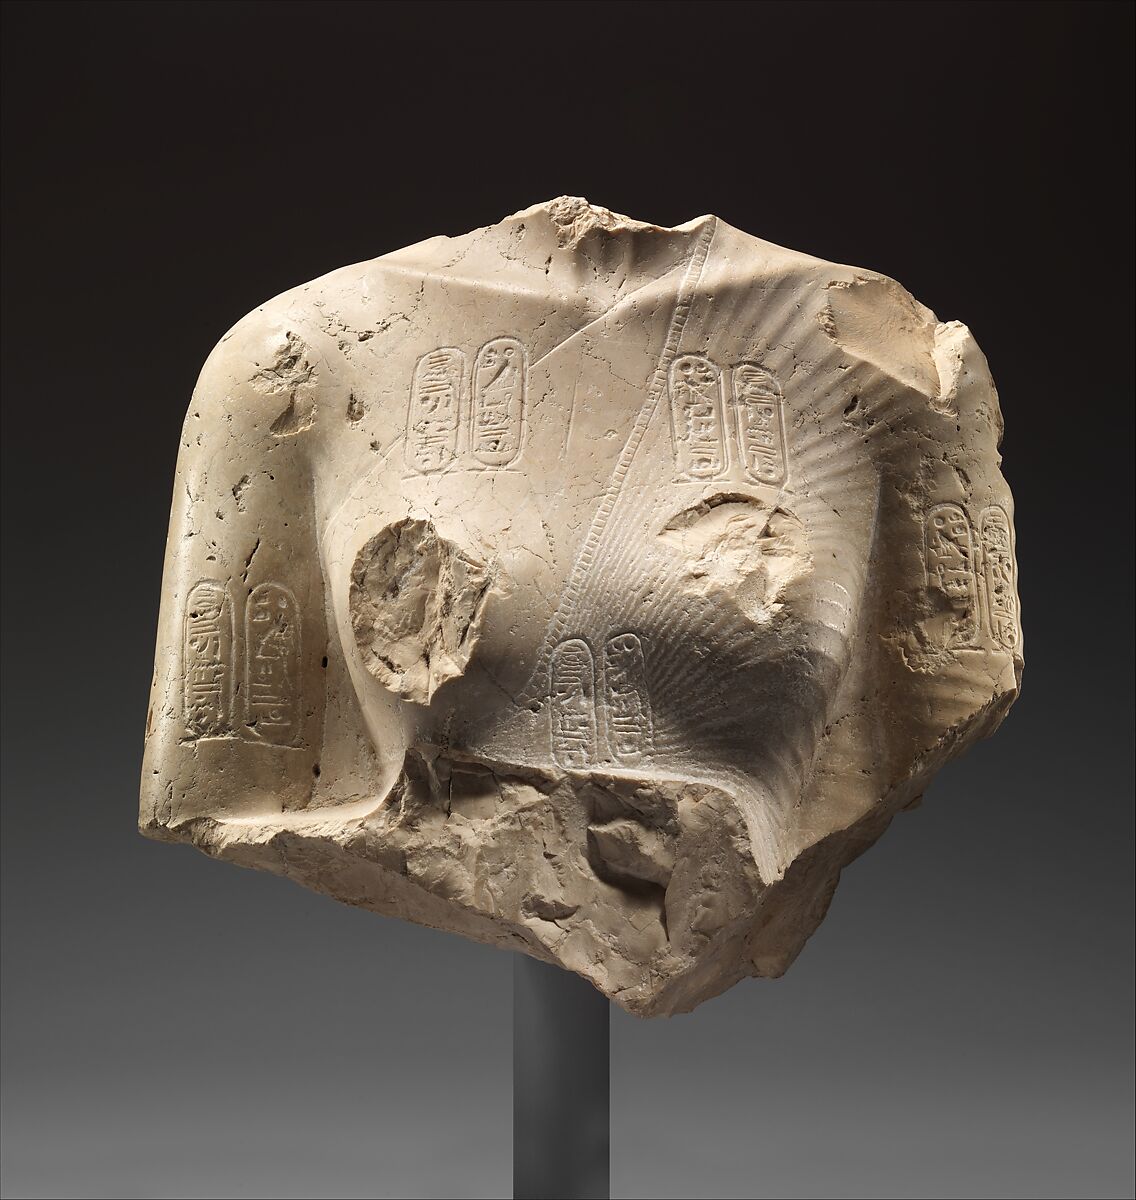 Torso of Nefertiti from a dyad holding a stela in front of the bodies